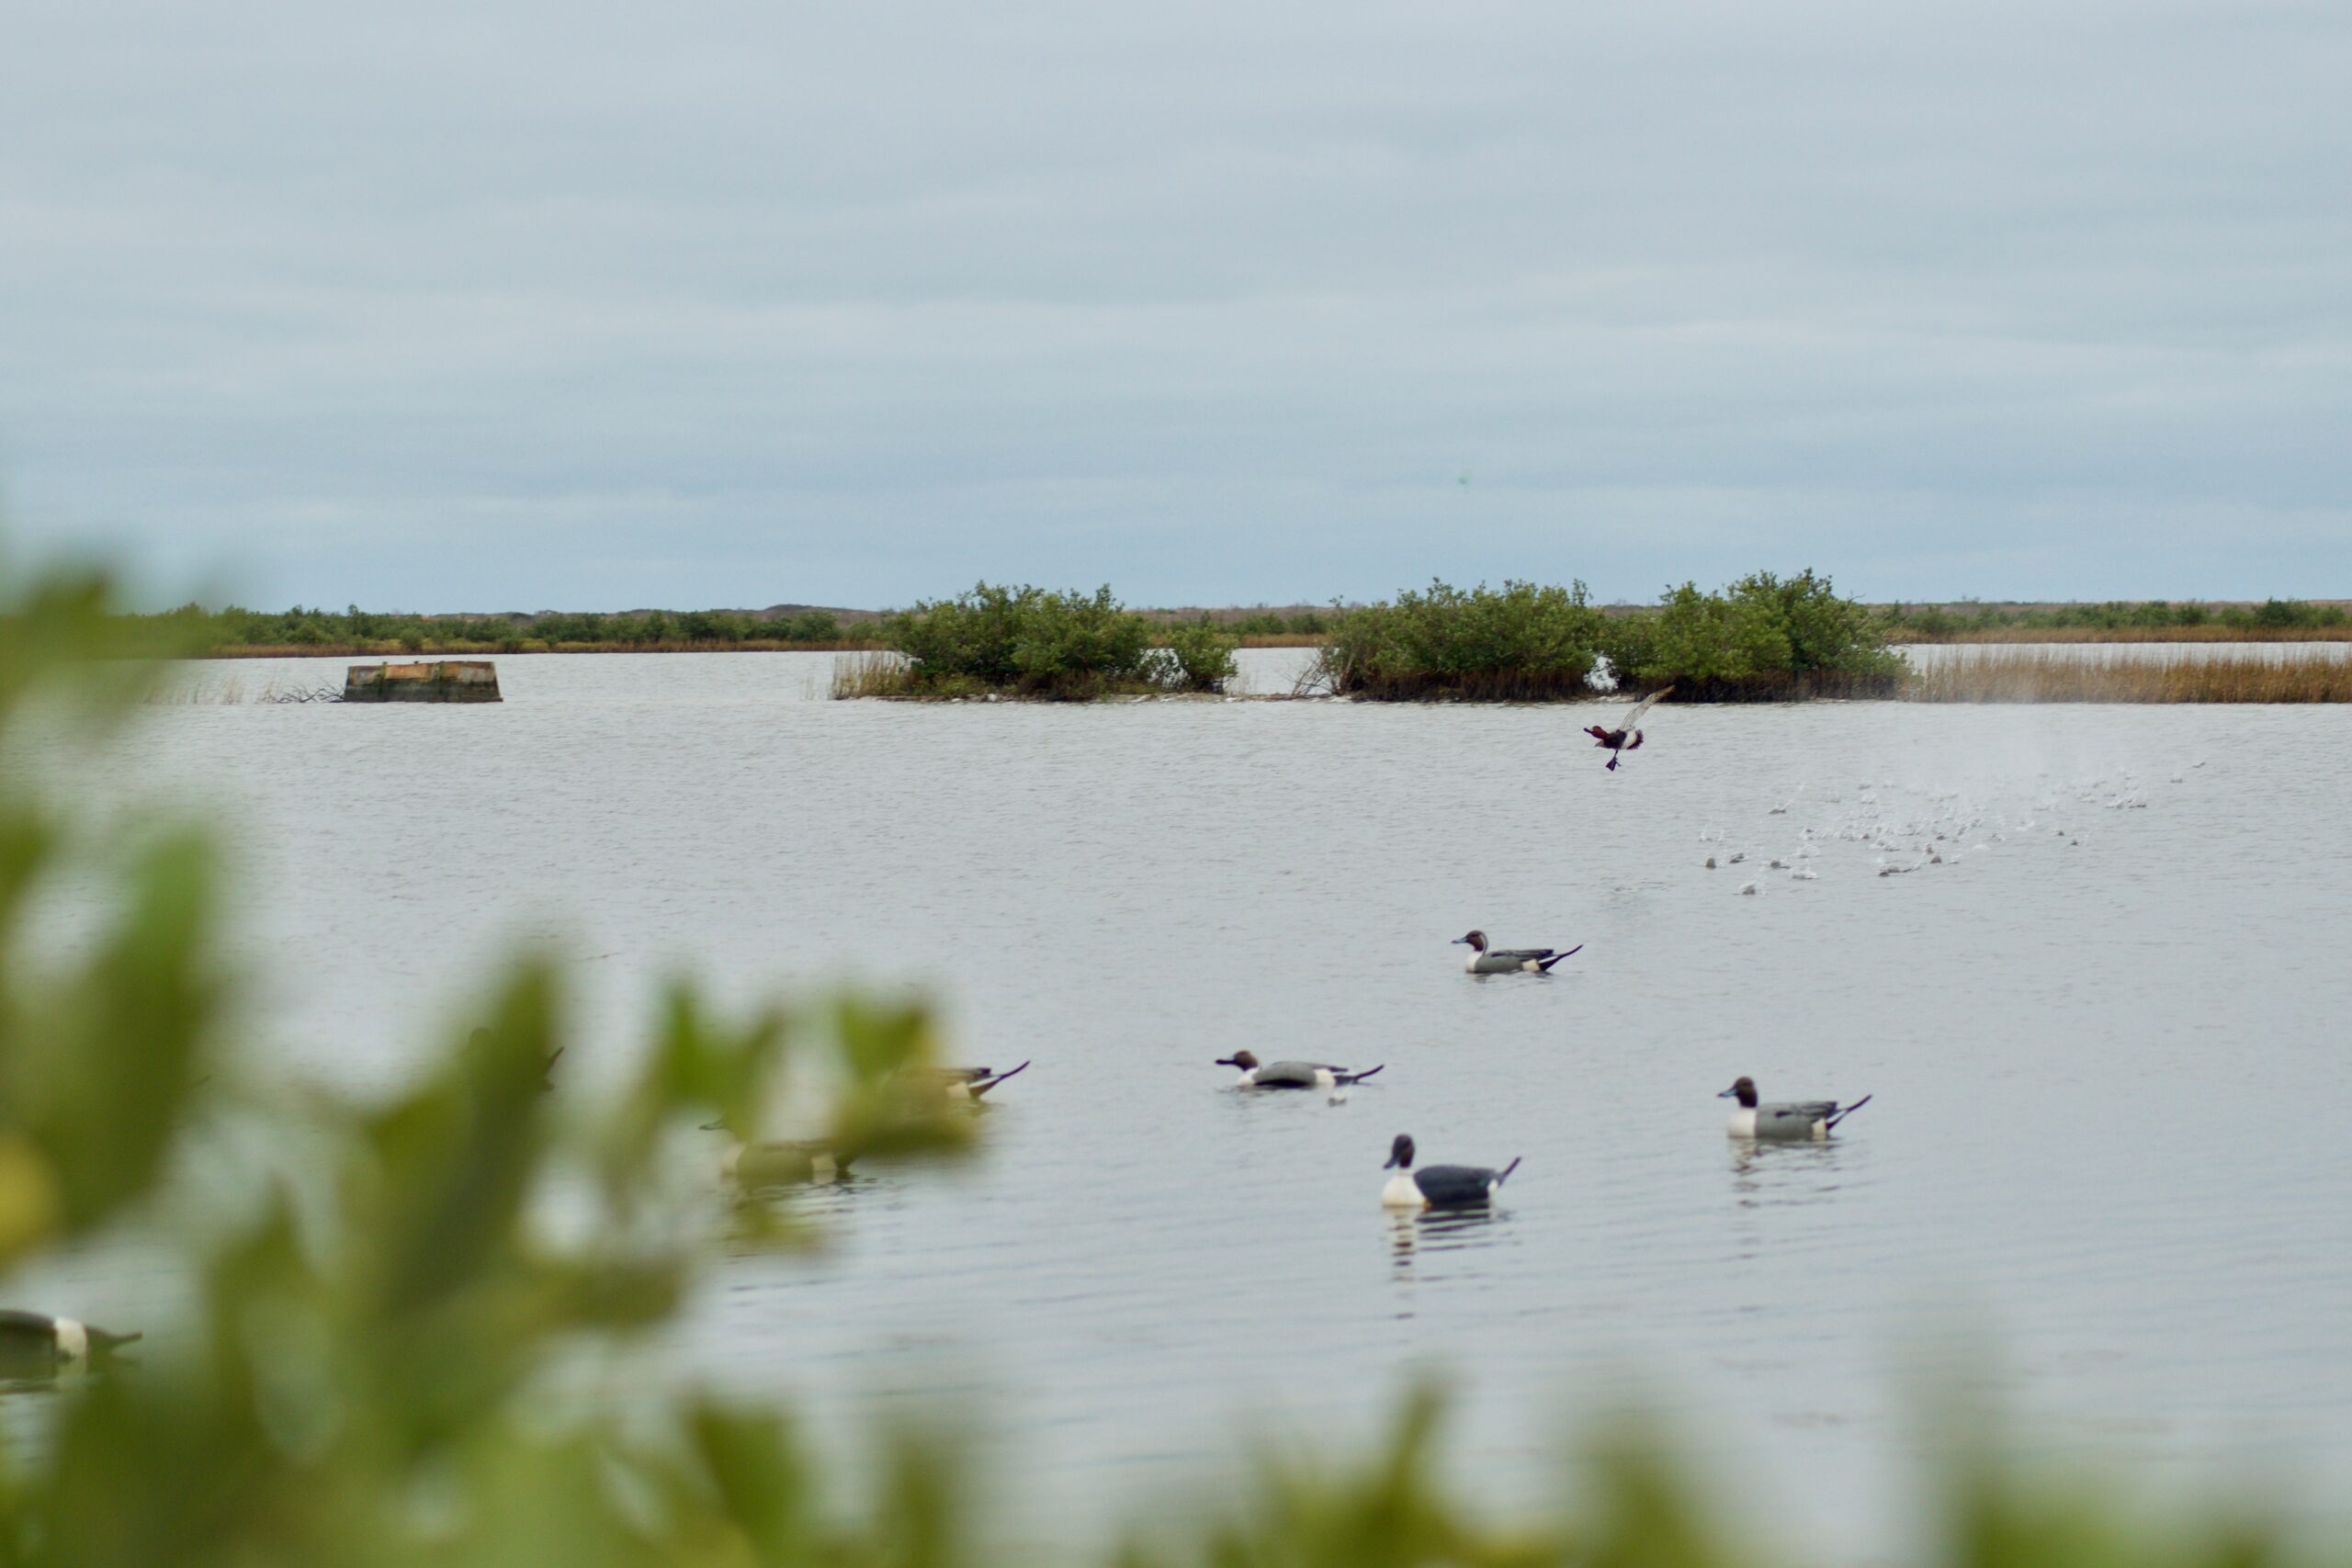 Hunting redheads on the Texas coast is a long-standing tradition.